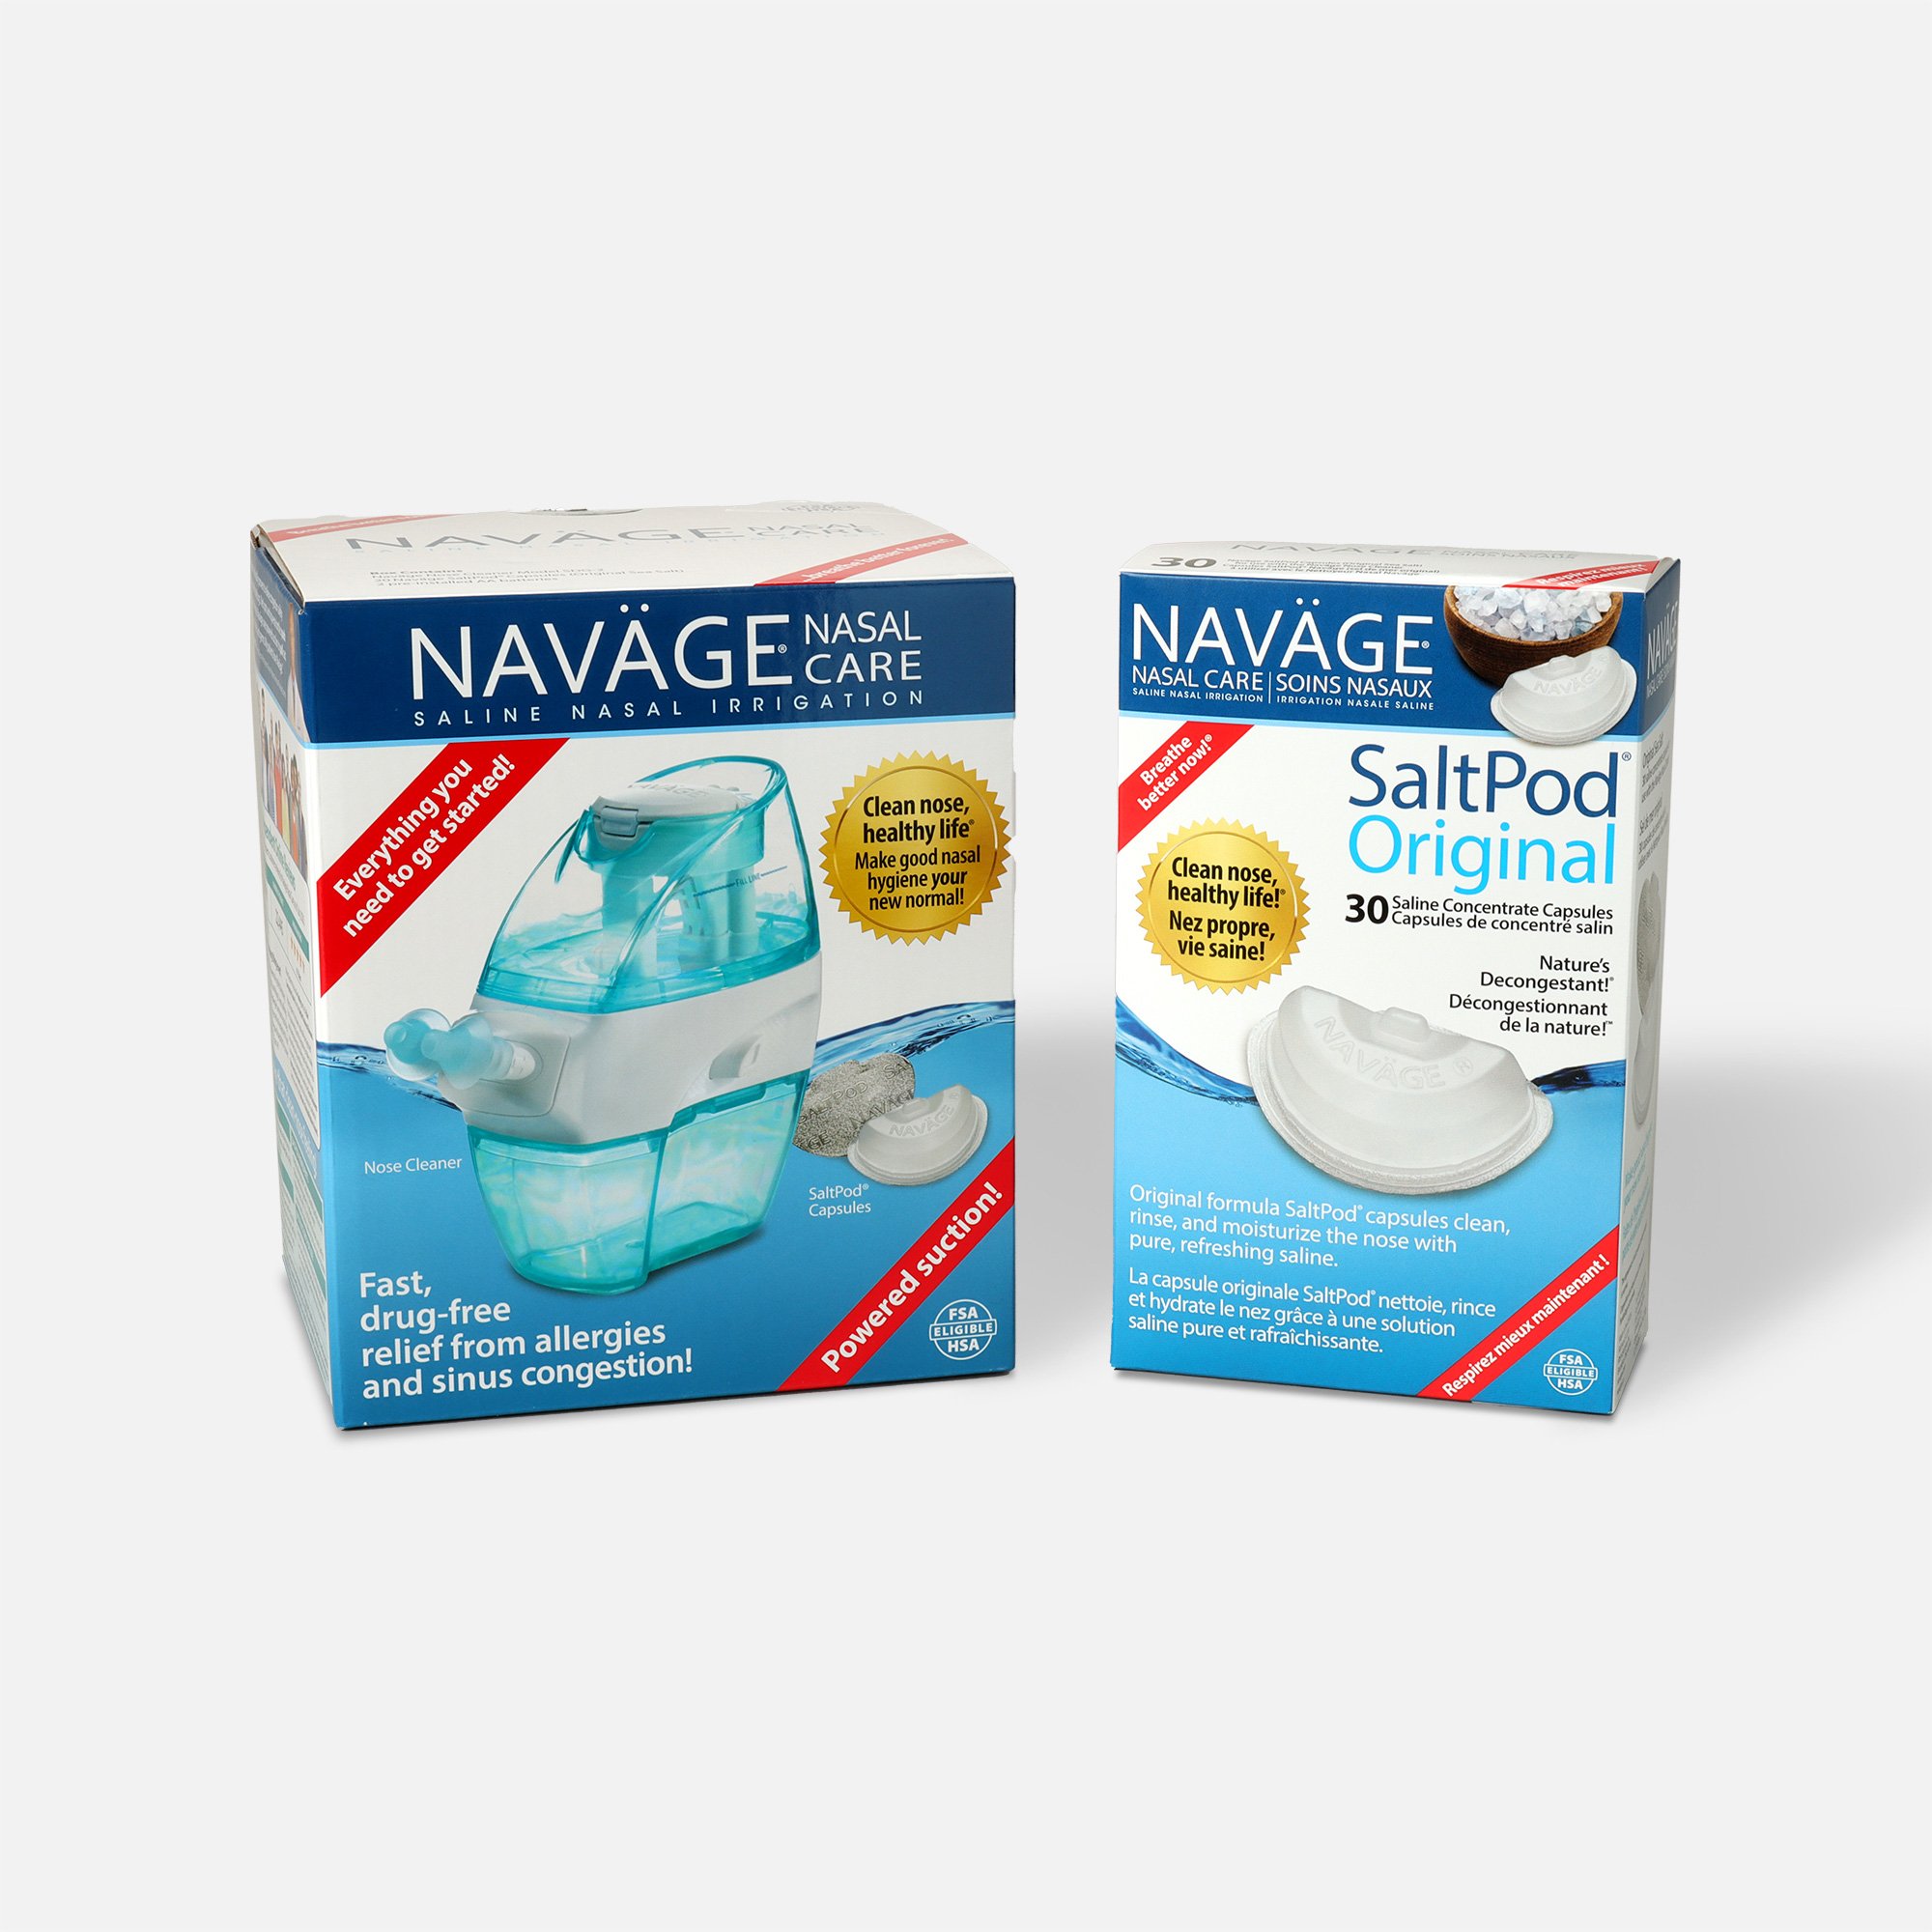 The Navage Nose Cleaner, Could this be the answer to your sinus problems?, By Mashable